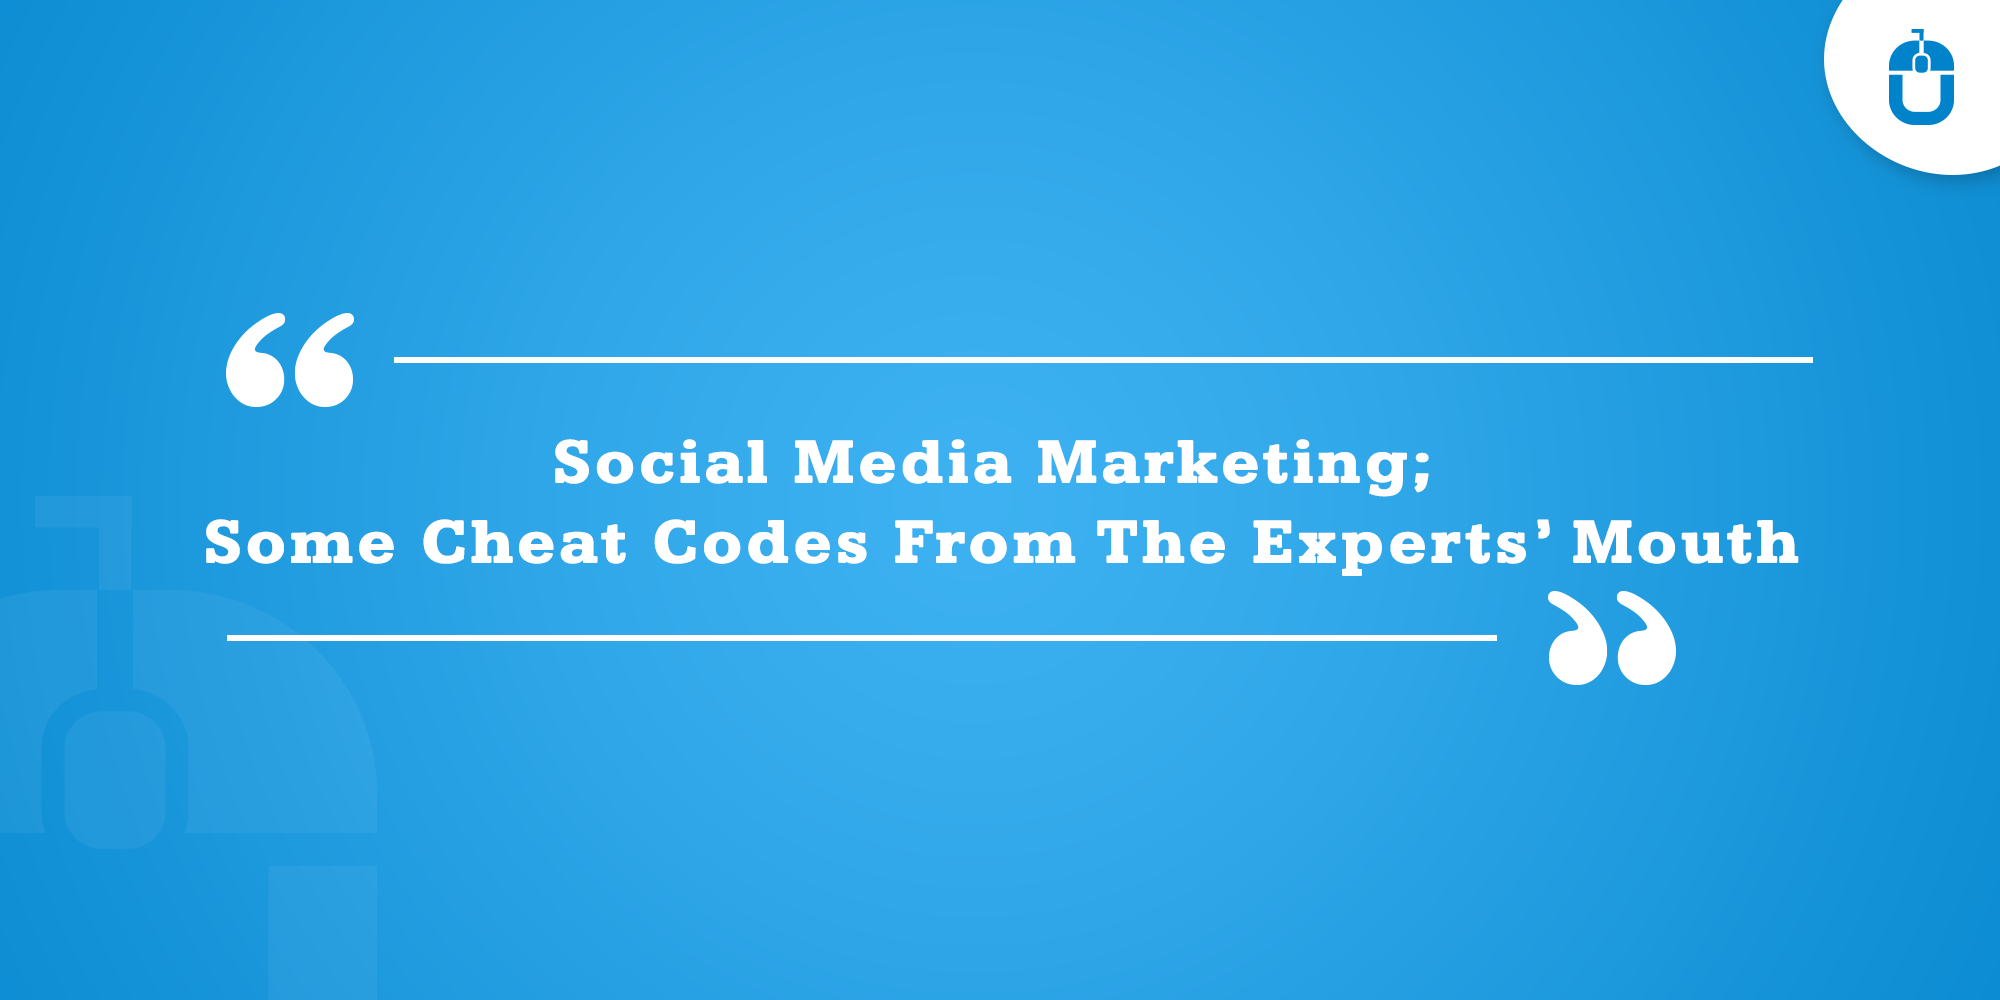 Social Media Marketing; Some Cheat Codes From The Experts’ Mouth